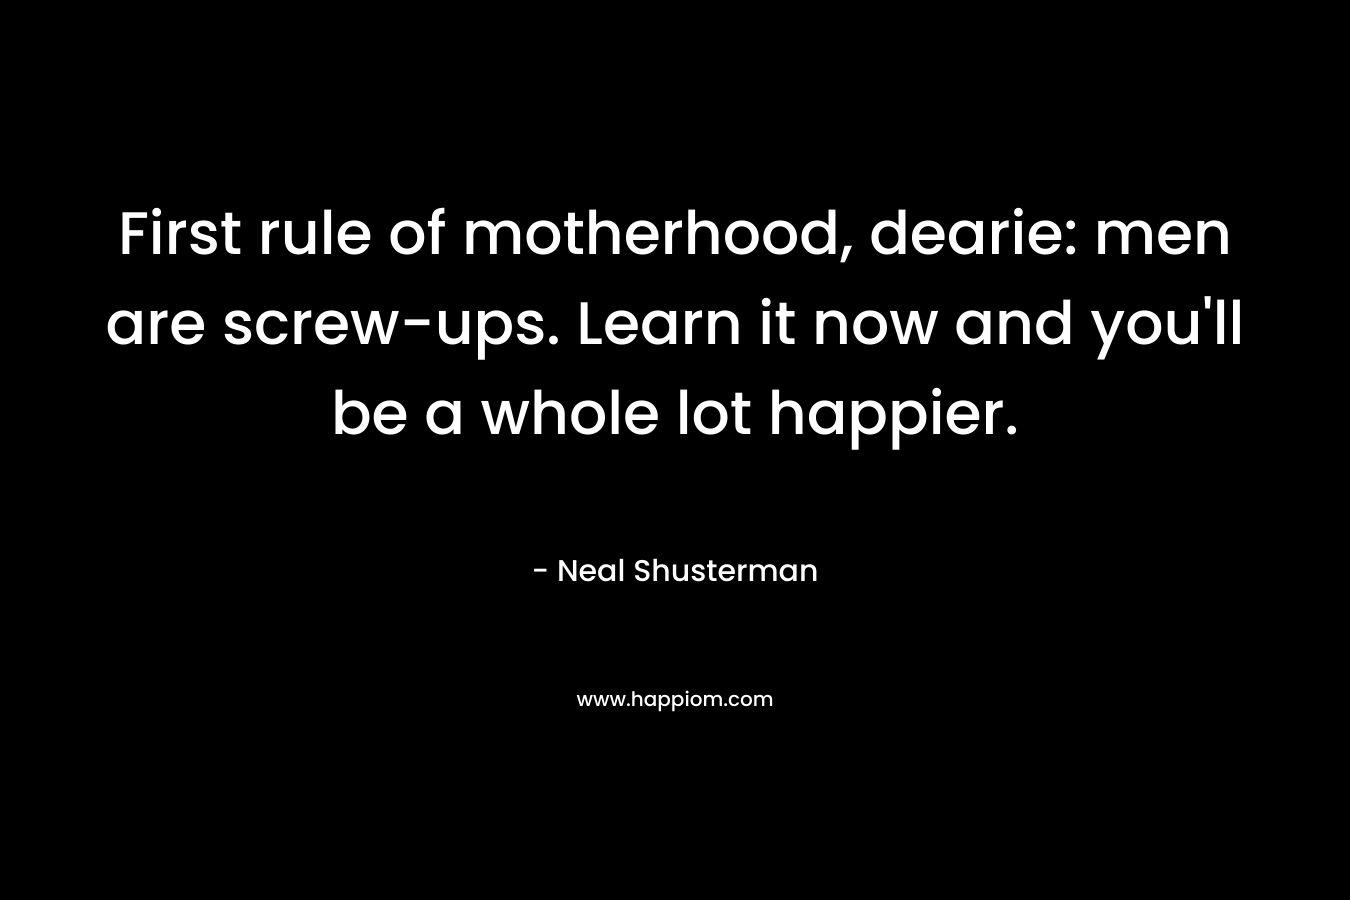 First rule of motherhood, dearie: men are screw-ups. Learn it now and you’ll be a whole lot happier. – Neal Shusterman